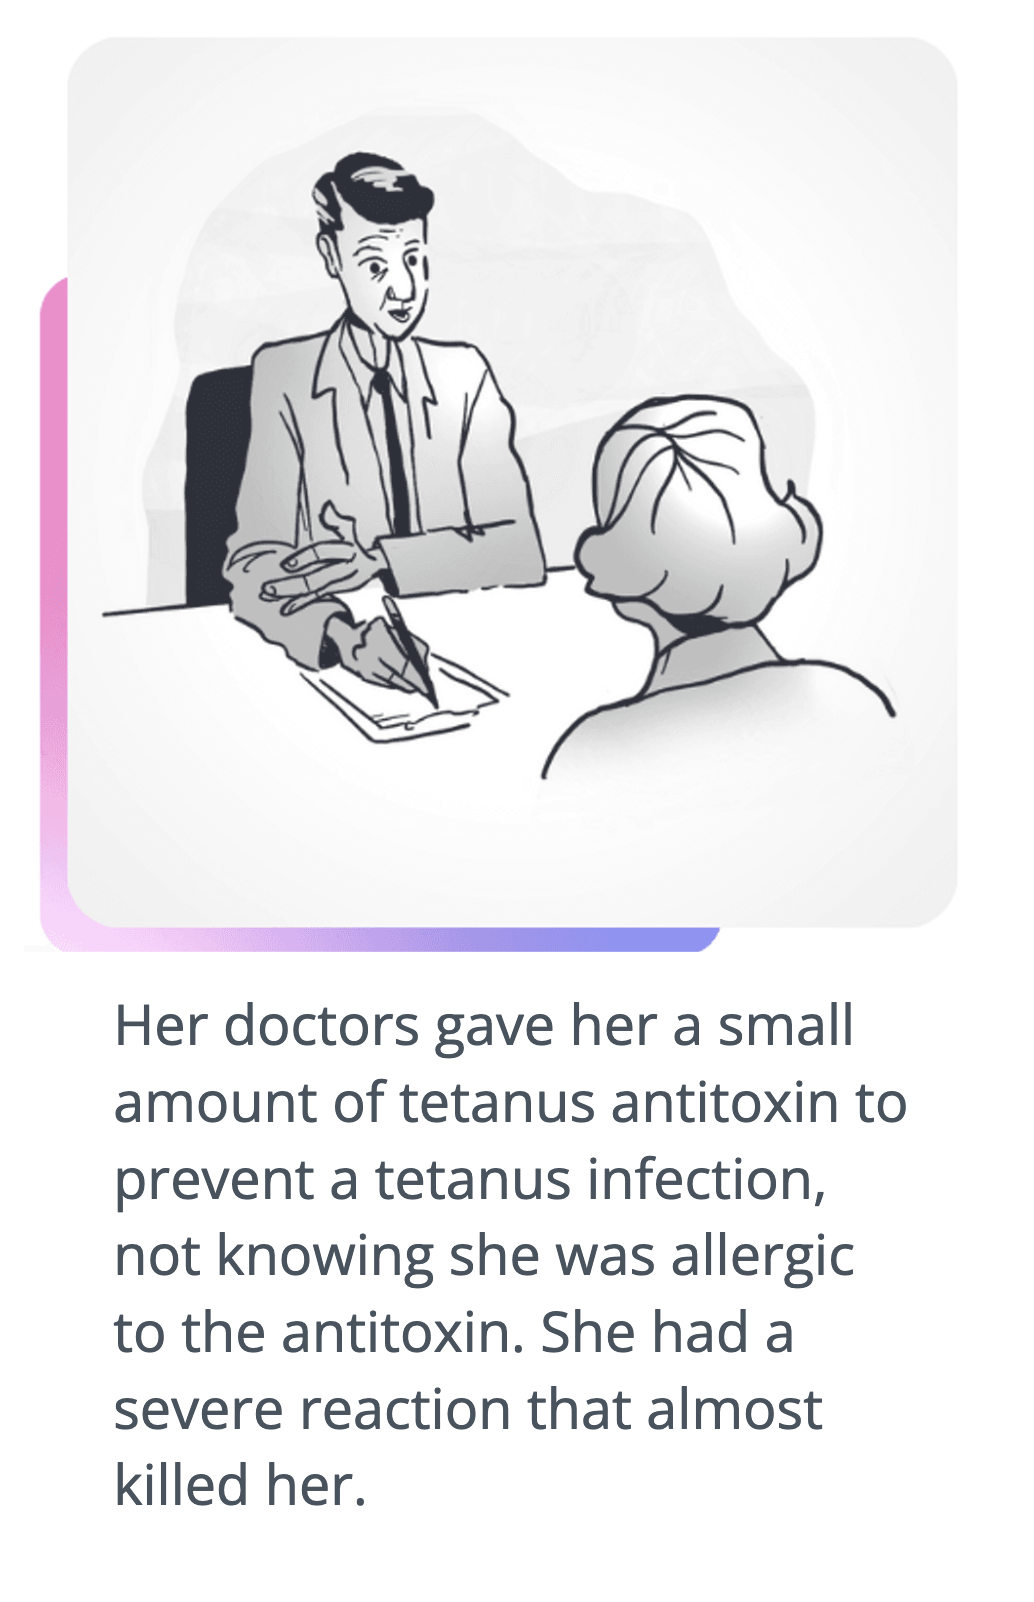 Drawing of doctor talking to woman - script says: Her doctors gave her a small amount of tetanus antitoxin to prevent a tetanus infection, not knowing she was allergic to the antitoxin. She had a severe reaction that almost killed her